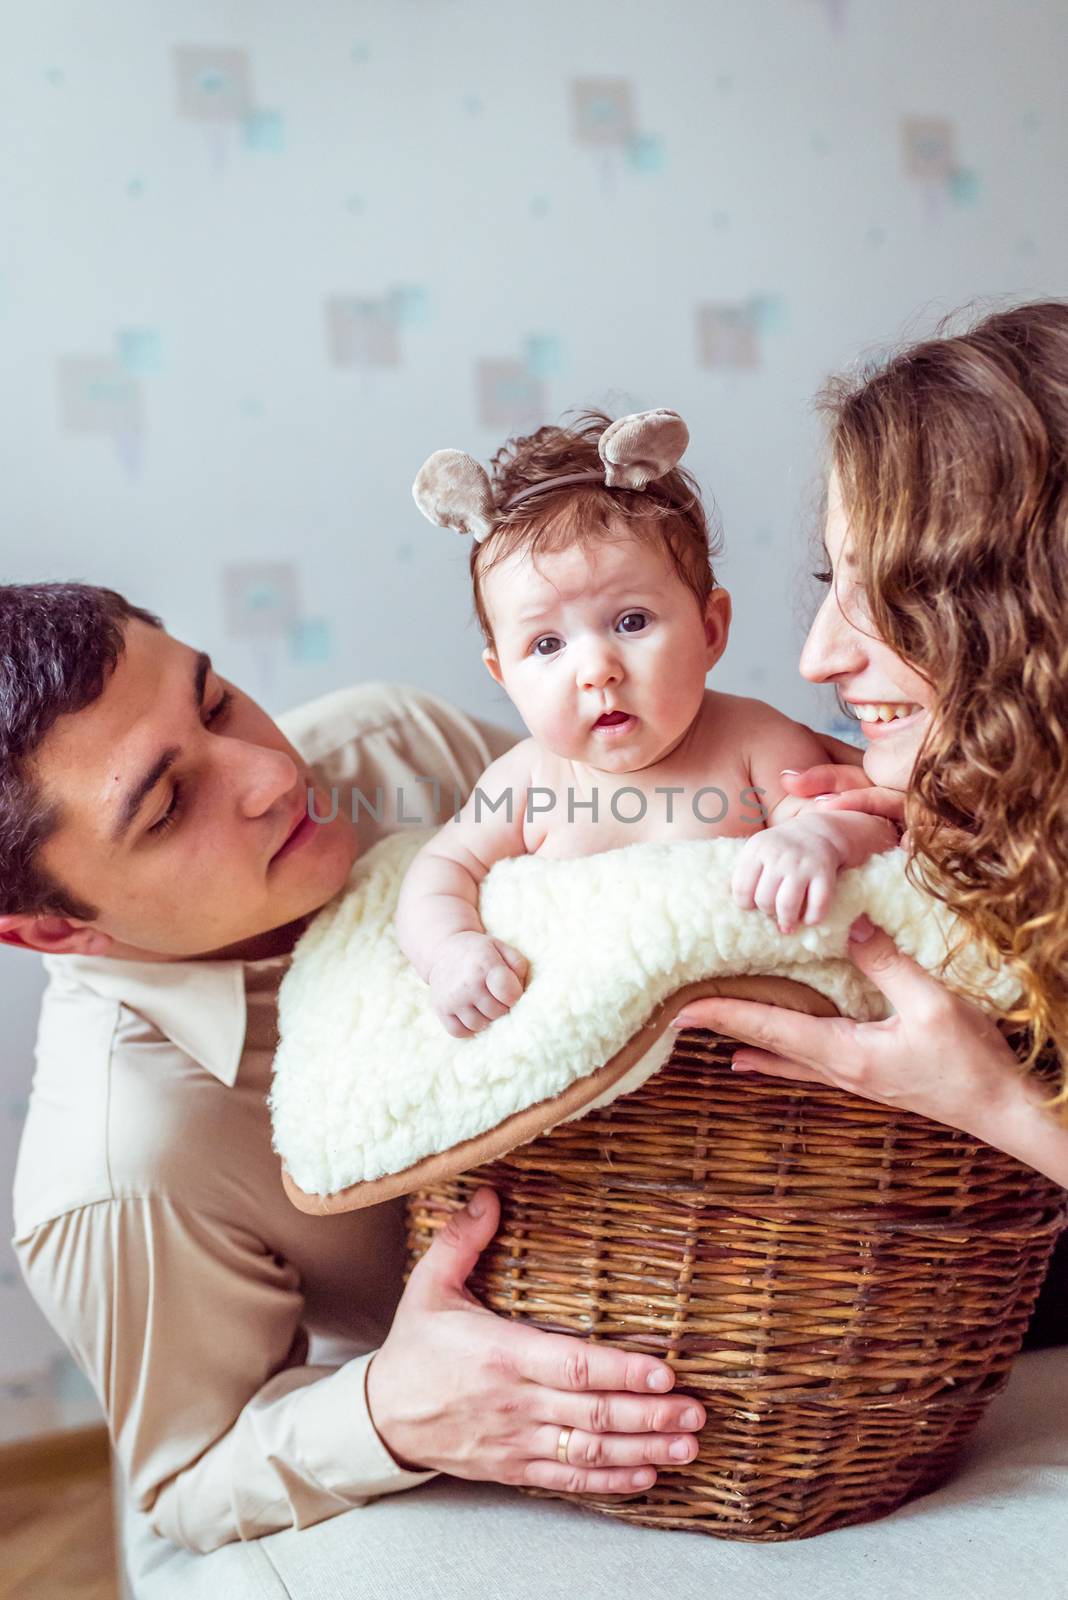 naked baby with her parents sitting in the wicker basket on the white soft blanket